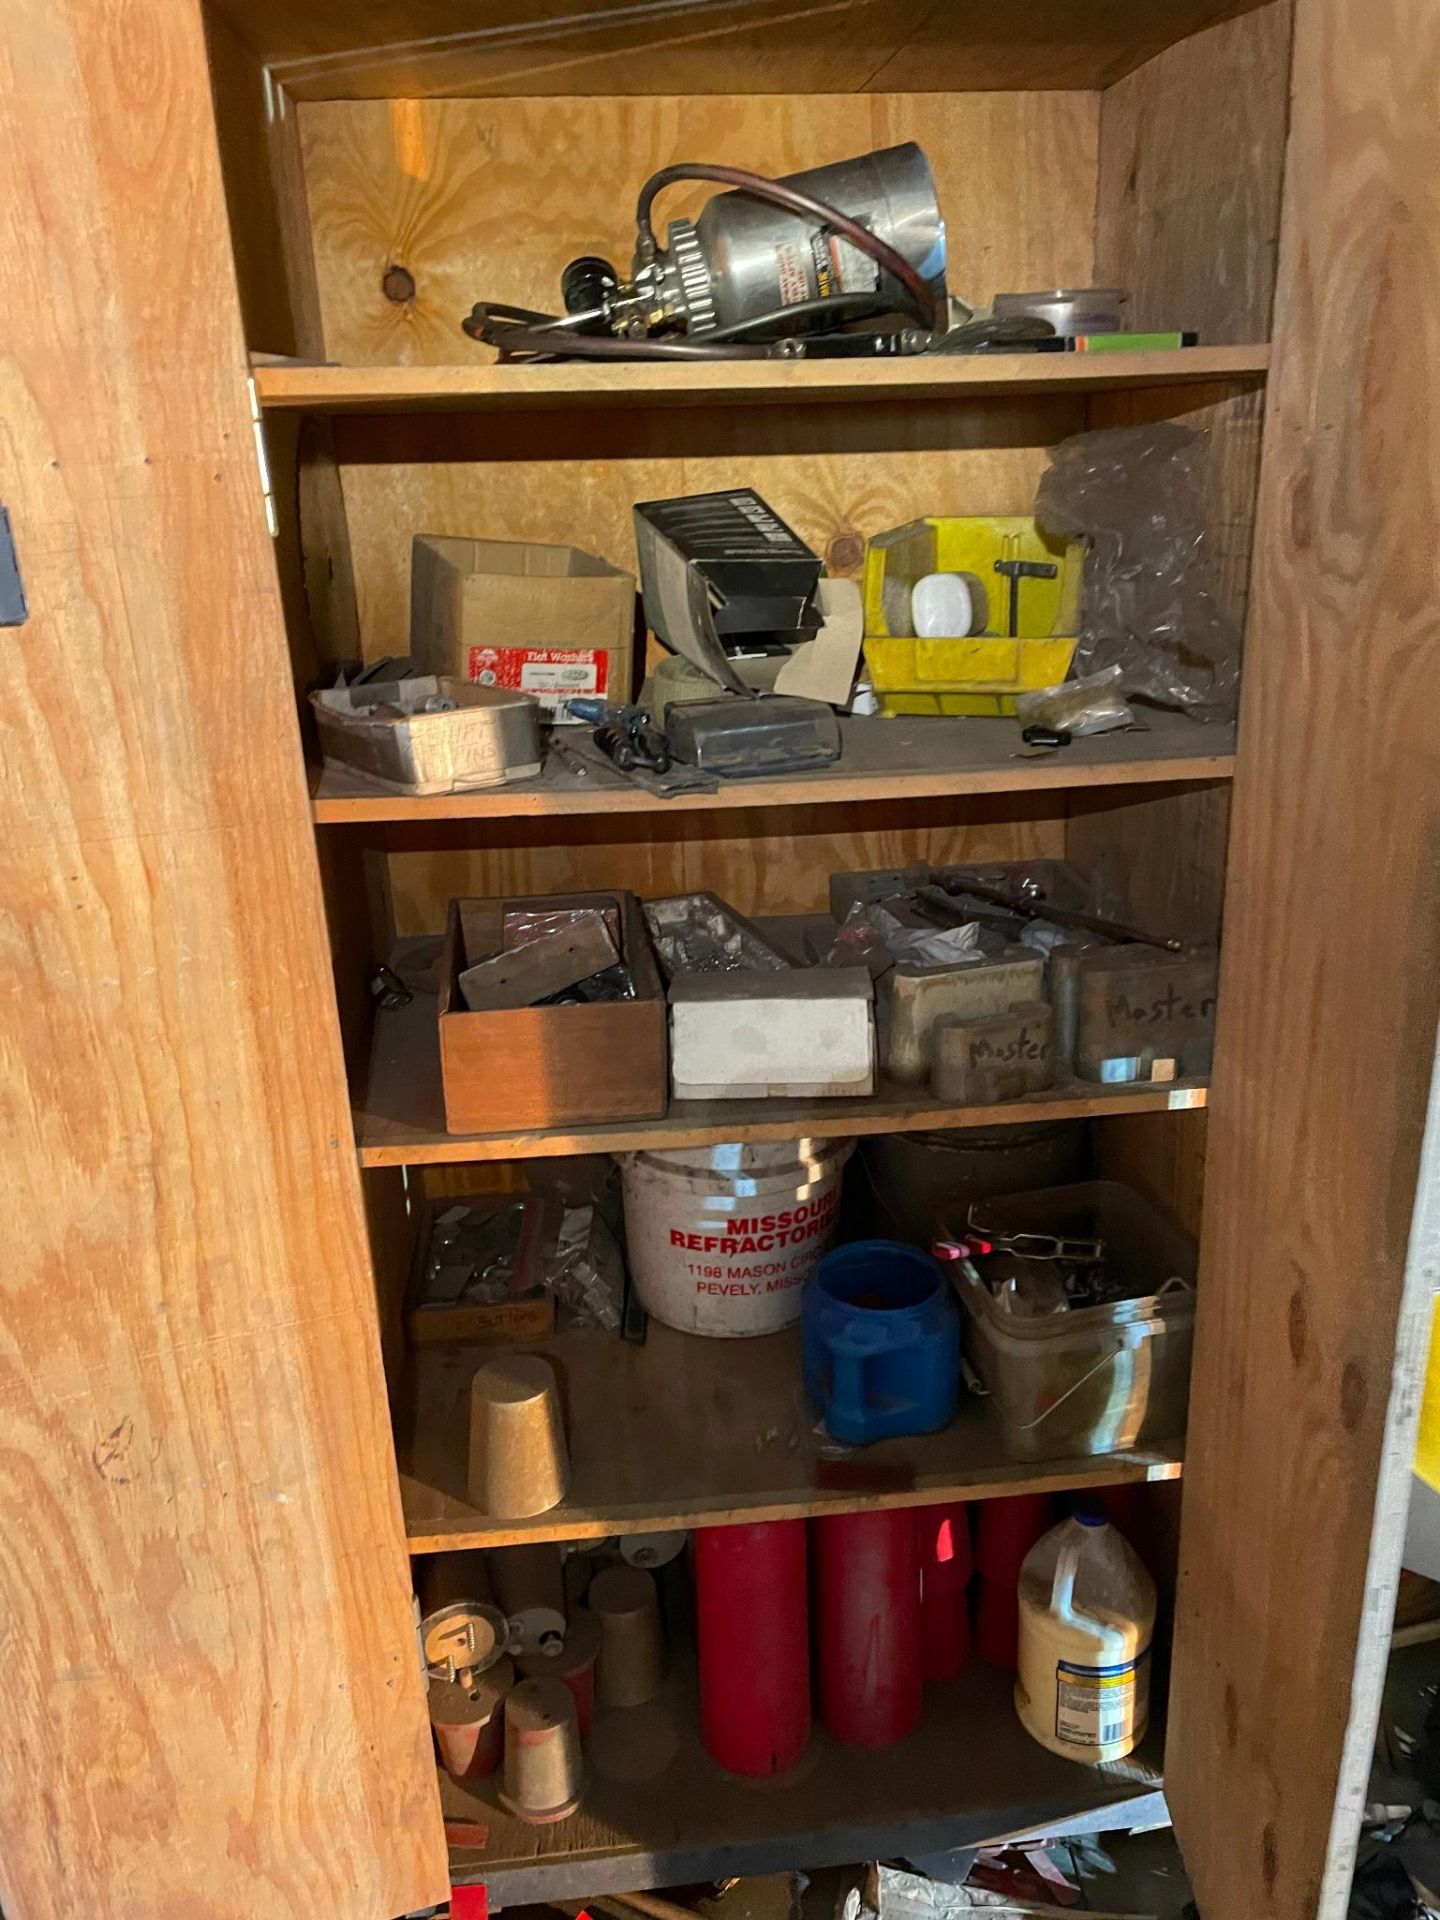 LOT OF WORK BENCHES & CABINETS, w/ contents: bar clamps, eye bolts, wood screws, lag screws, - Image 2 of 11